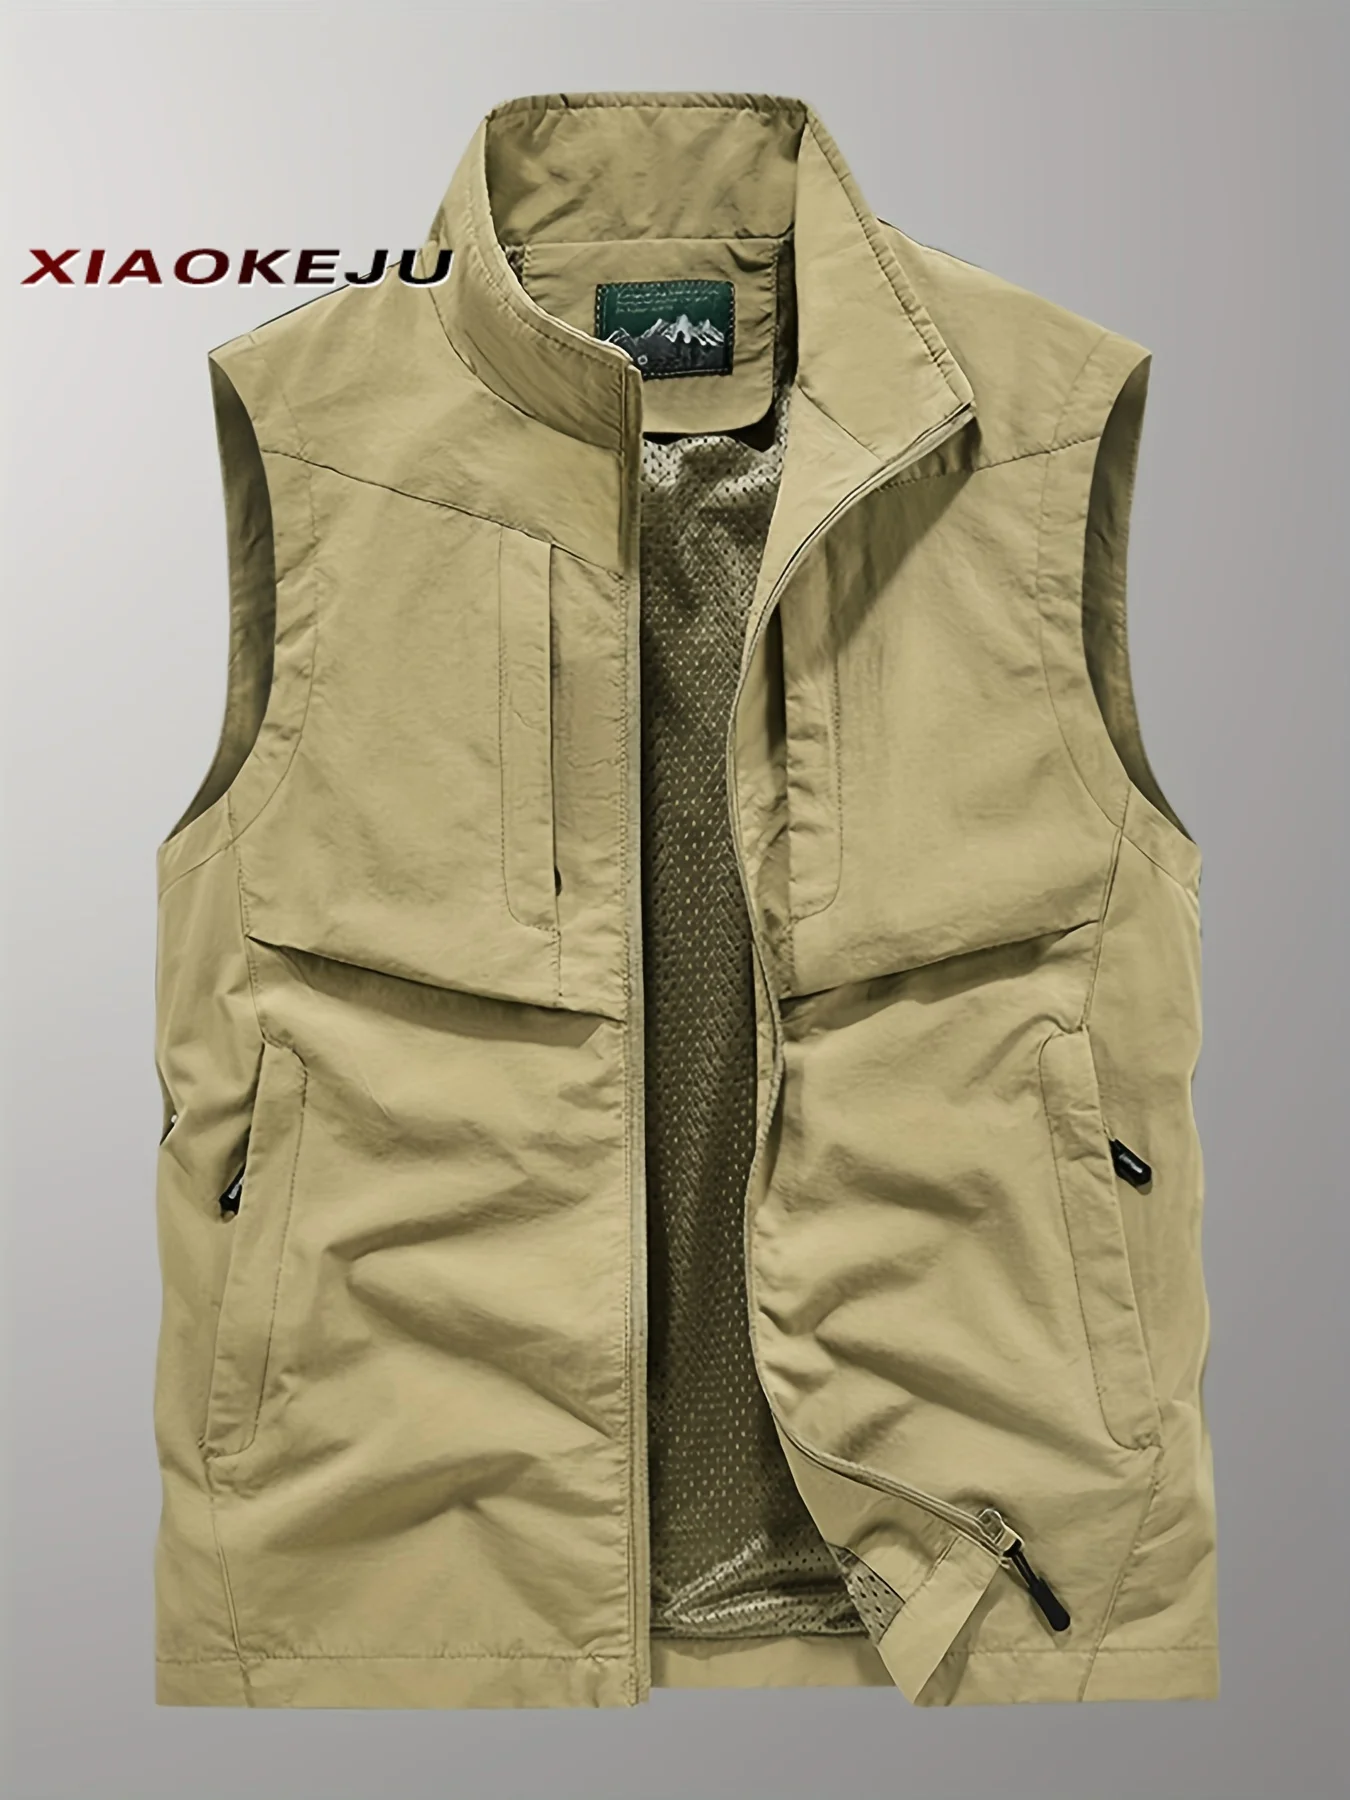 Summer Vest Men's Leather Multi-pocket Sleeveless Jacket Work Wear Mesh Camping Clothing Free Shipping Hunting Tactical Coat 8XL